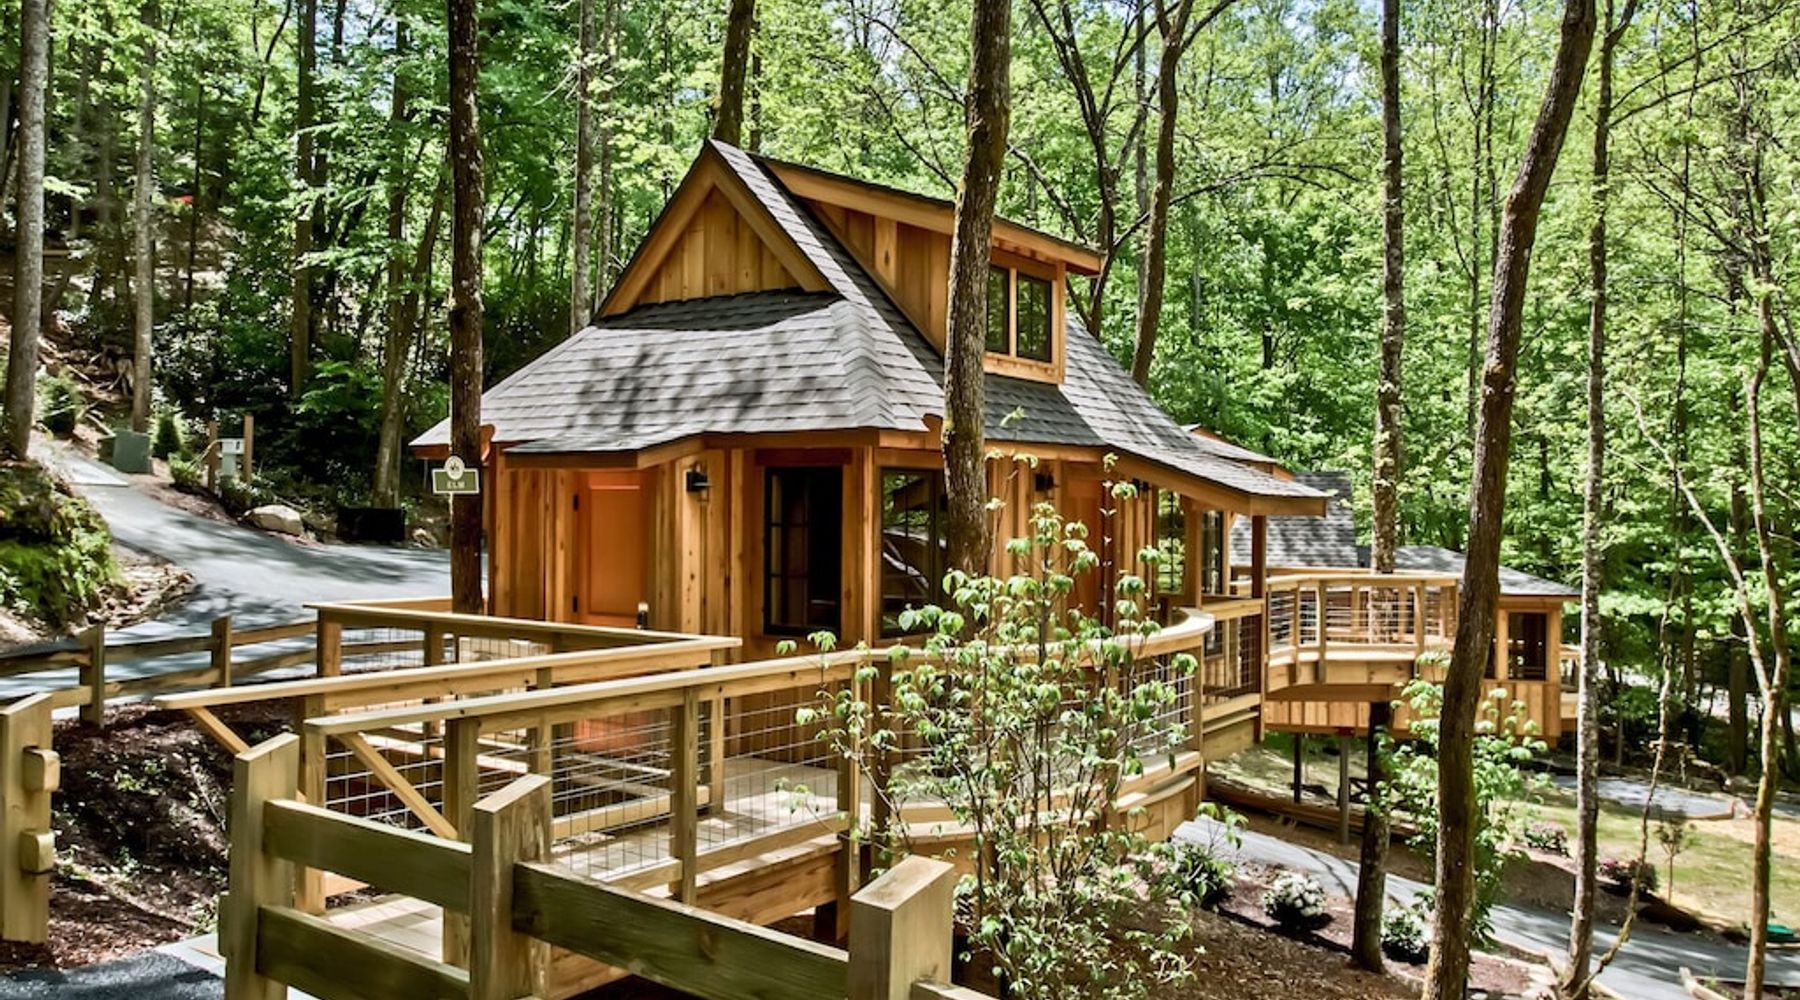 The Best Treehouses In The US

5. The Elm in Treehouse Grove at Norton Creek

Location:  Gatlinburg, Tennessee